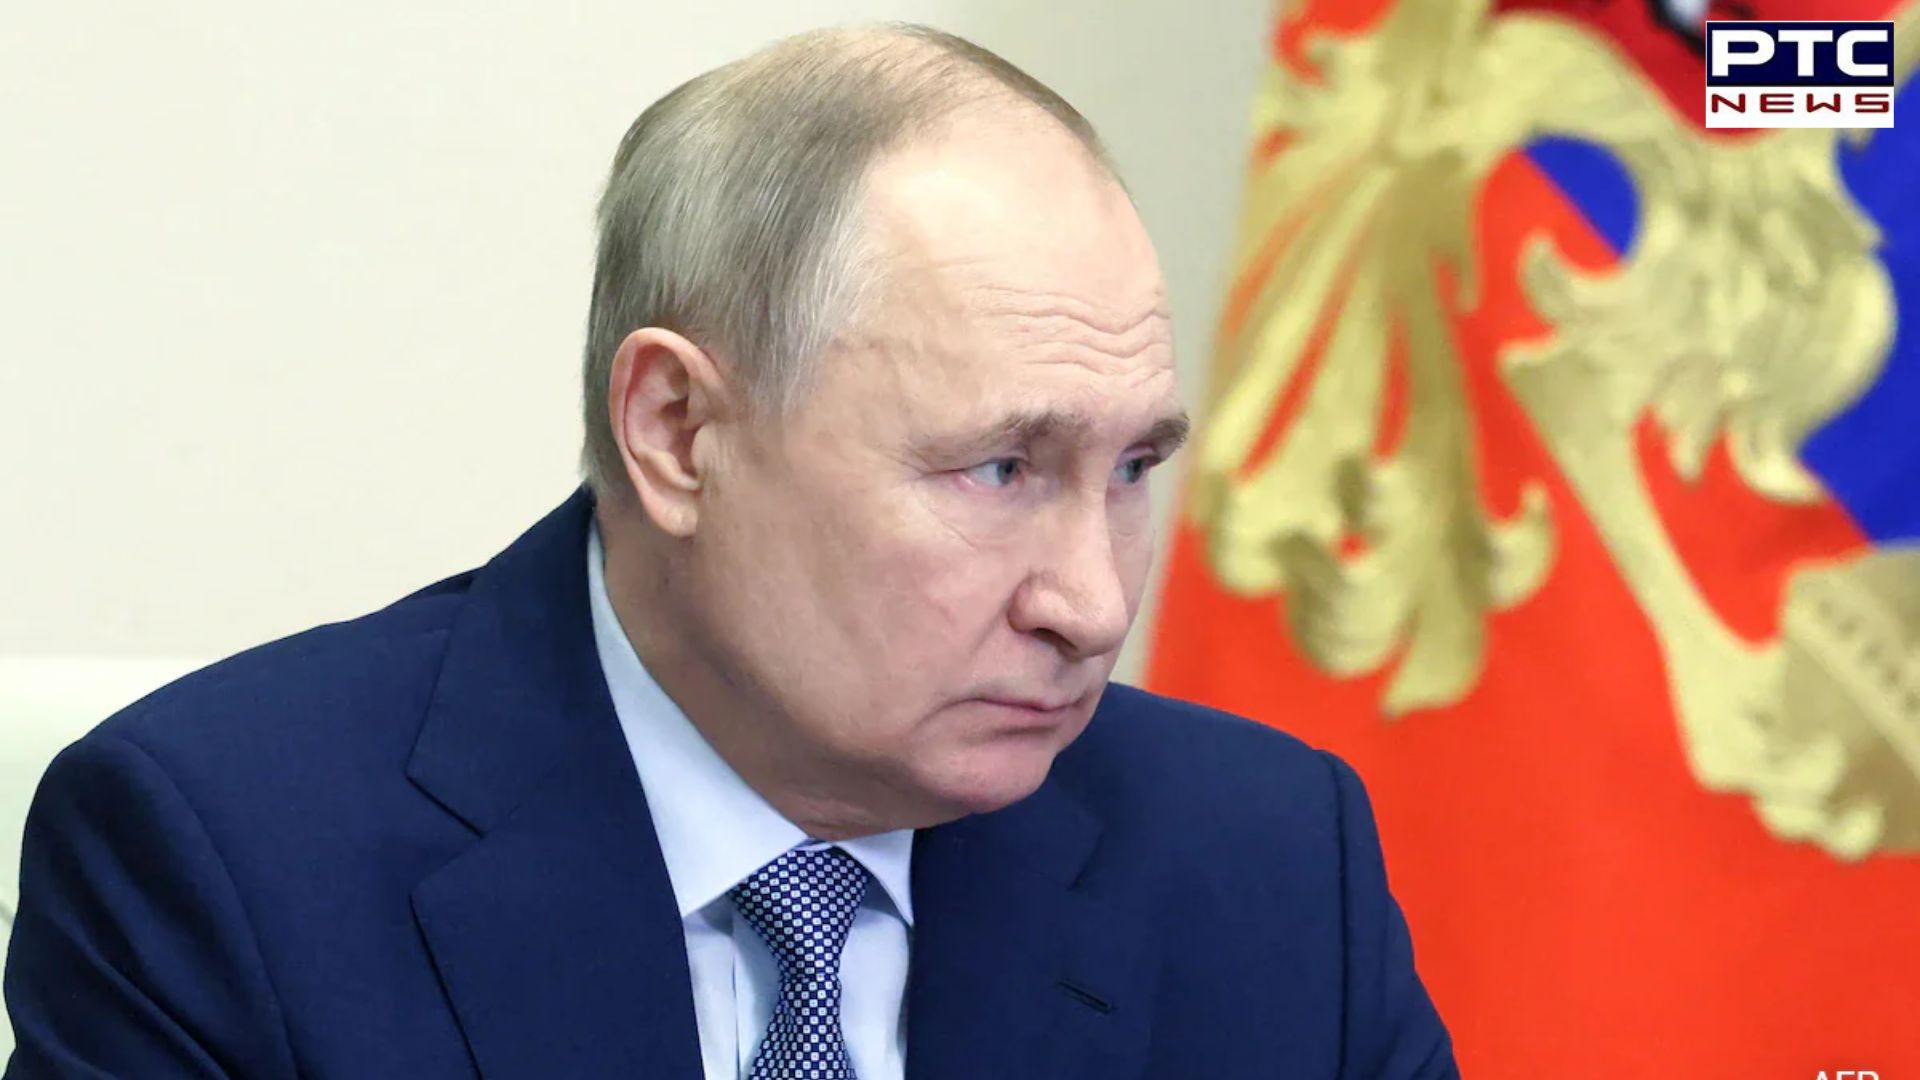 Putin calls Moscow assault as 'barbaric terrorist act'; declares March 24 day of mourning